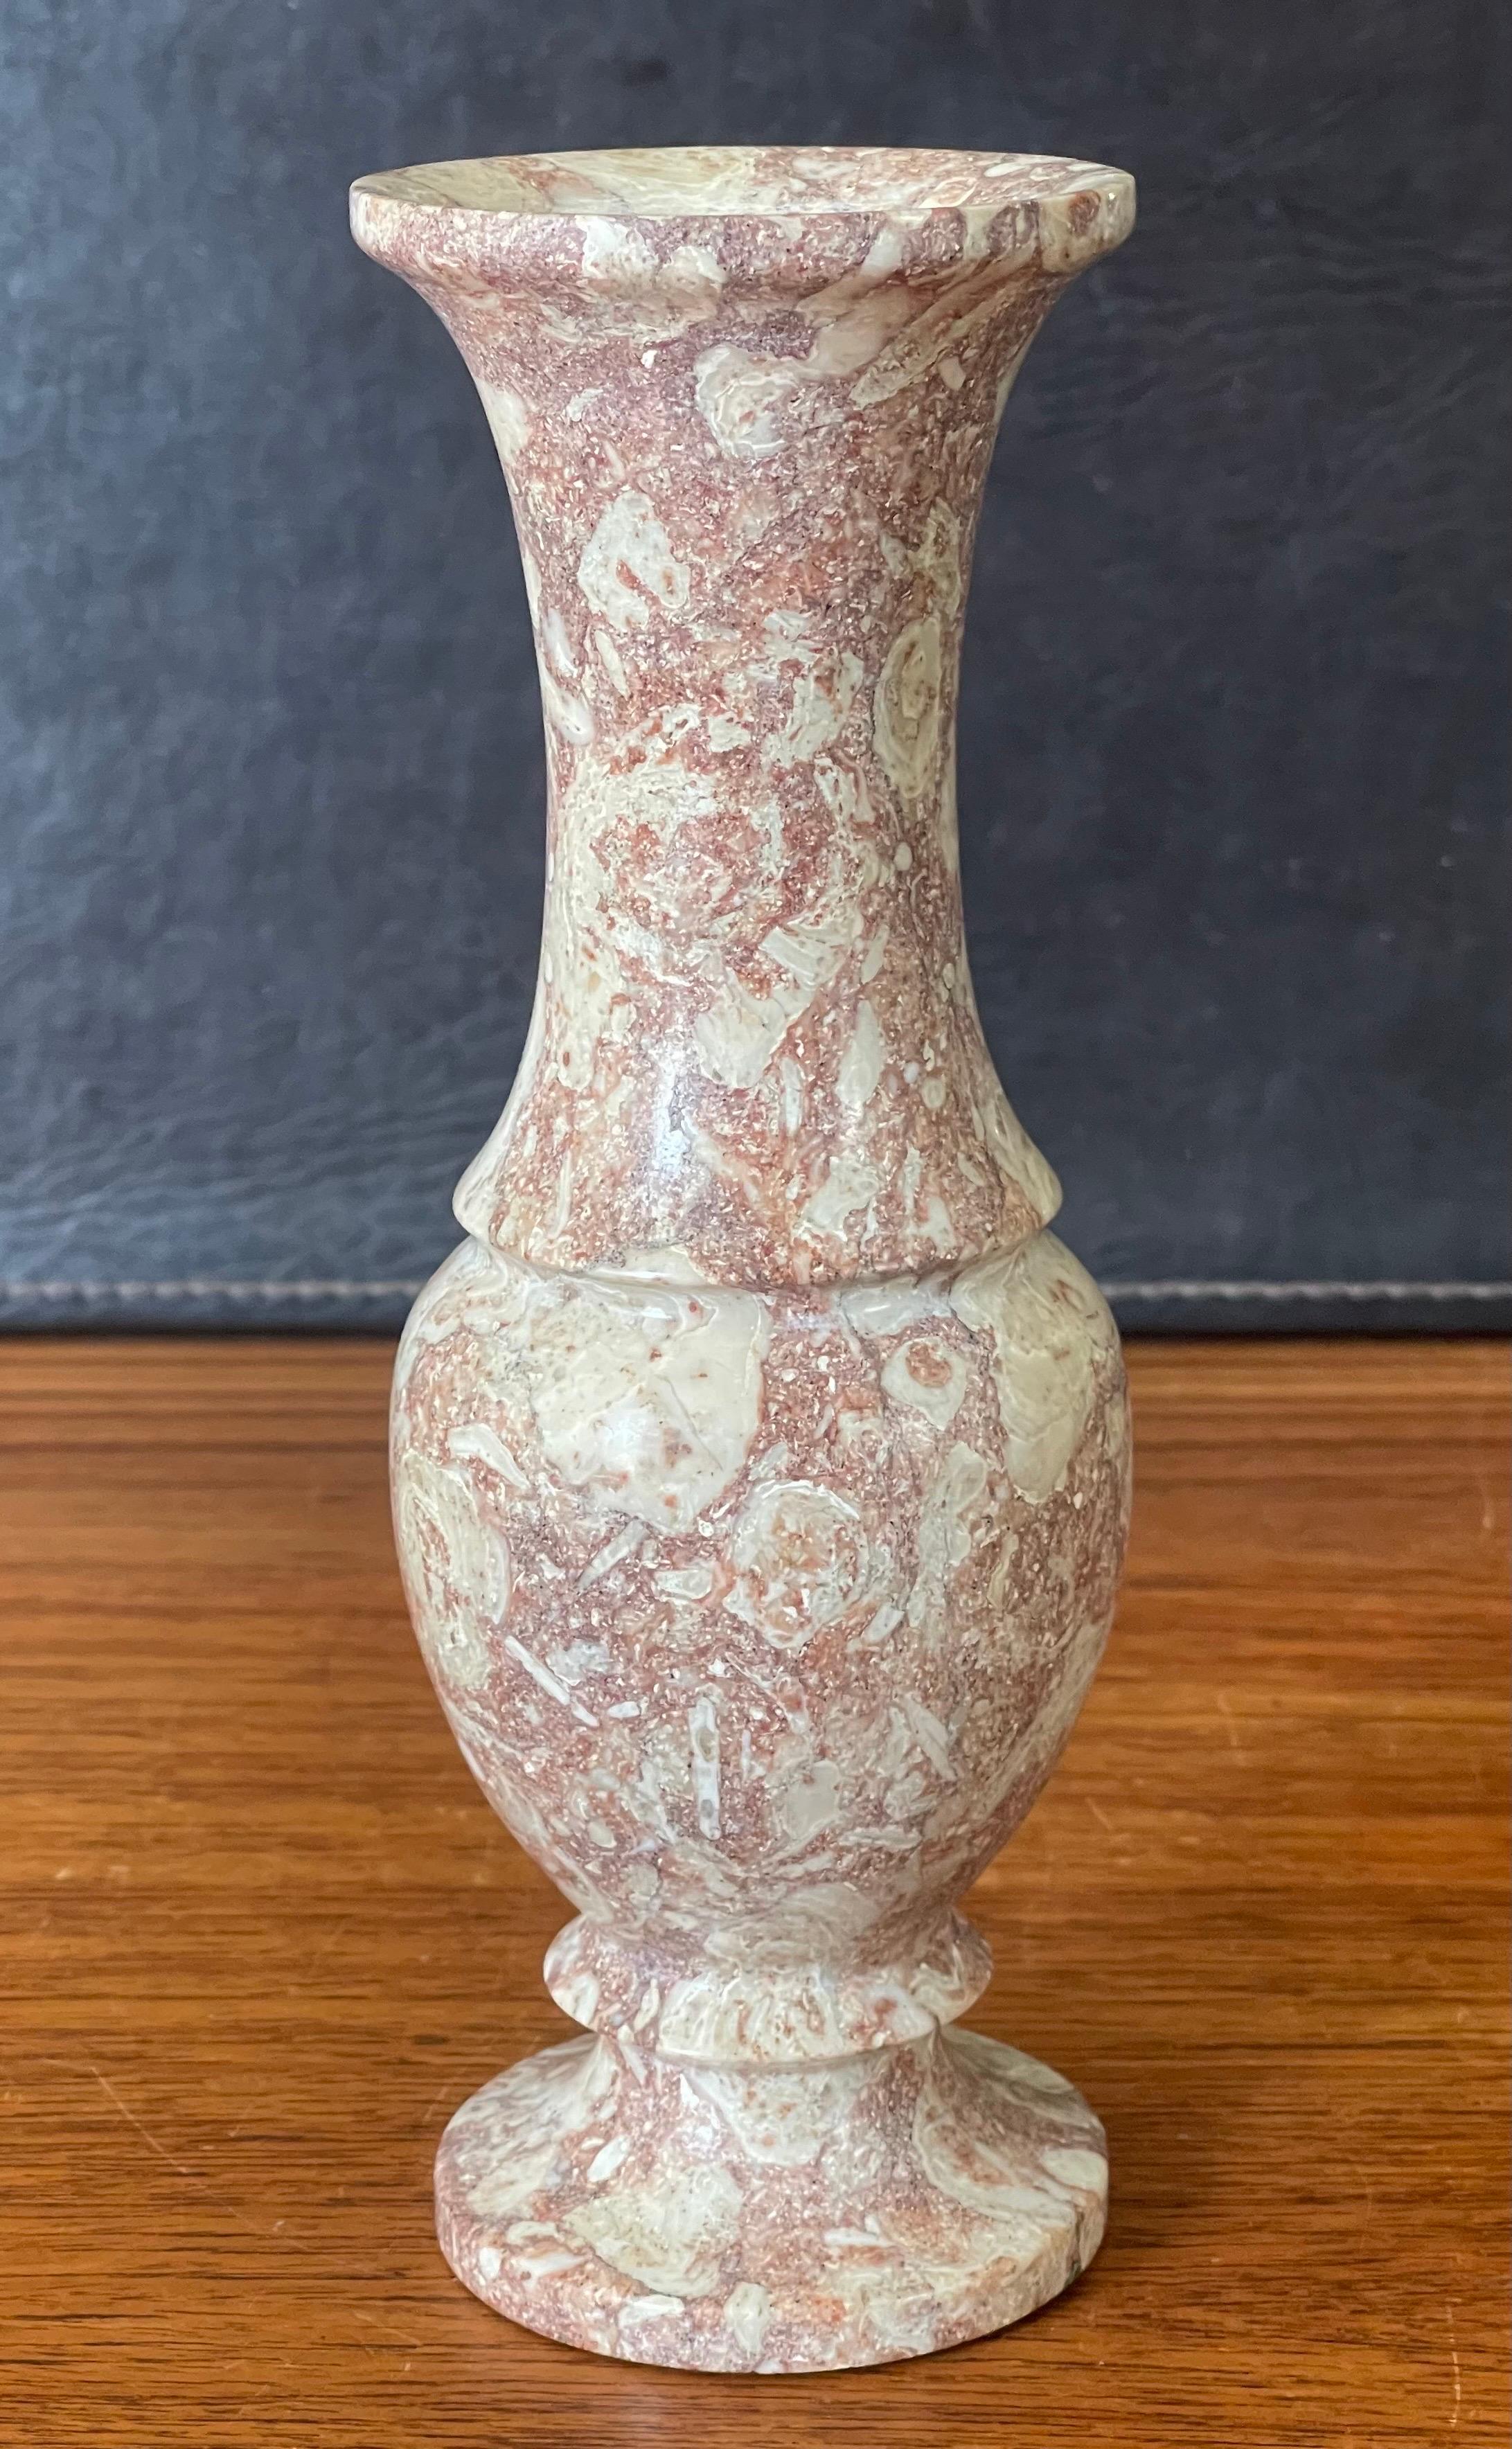 Gorgeous post-modern Italian marble vase, circa 1970s.  Striking tan, brown and cream fleck throughout the vase. The piece is in very good vintage condition with no chips or cracks and measures 3.5